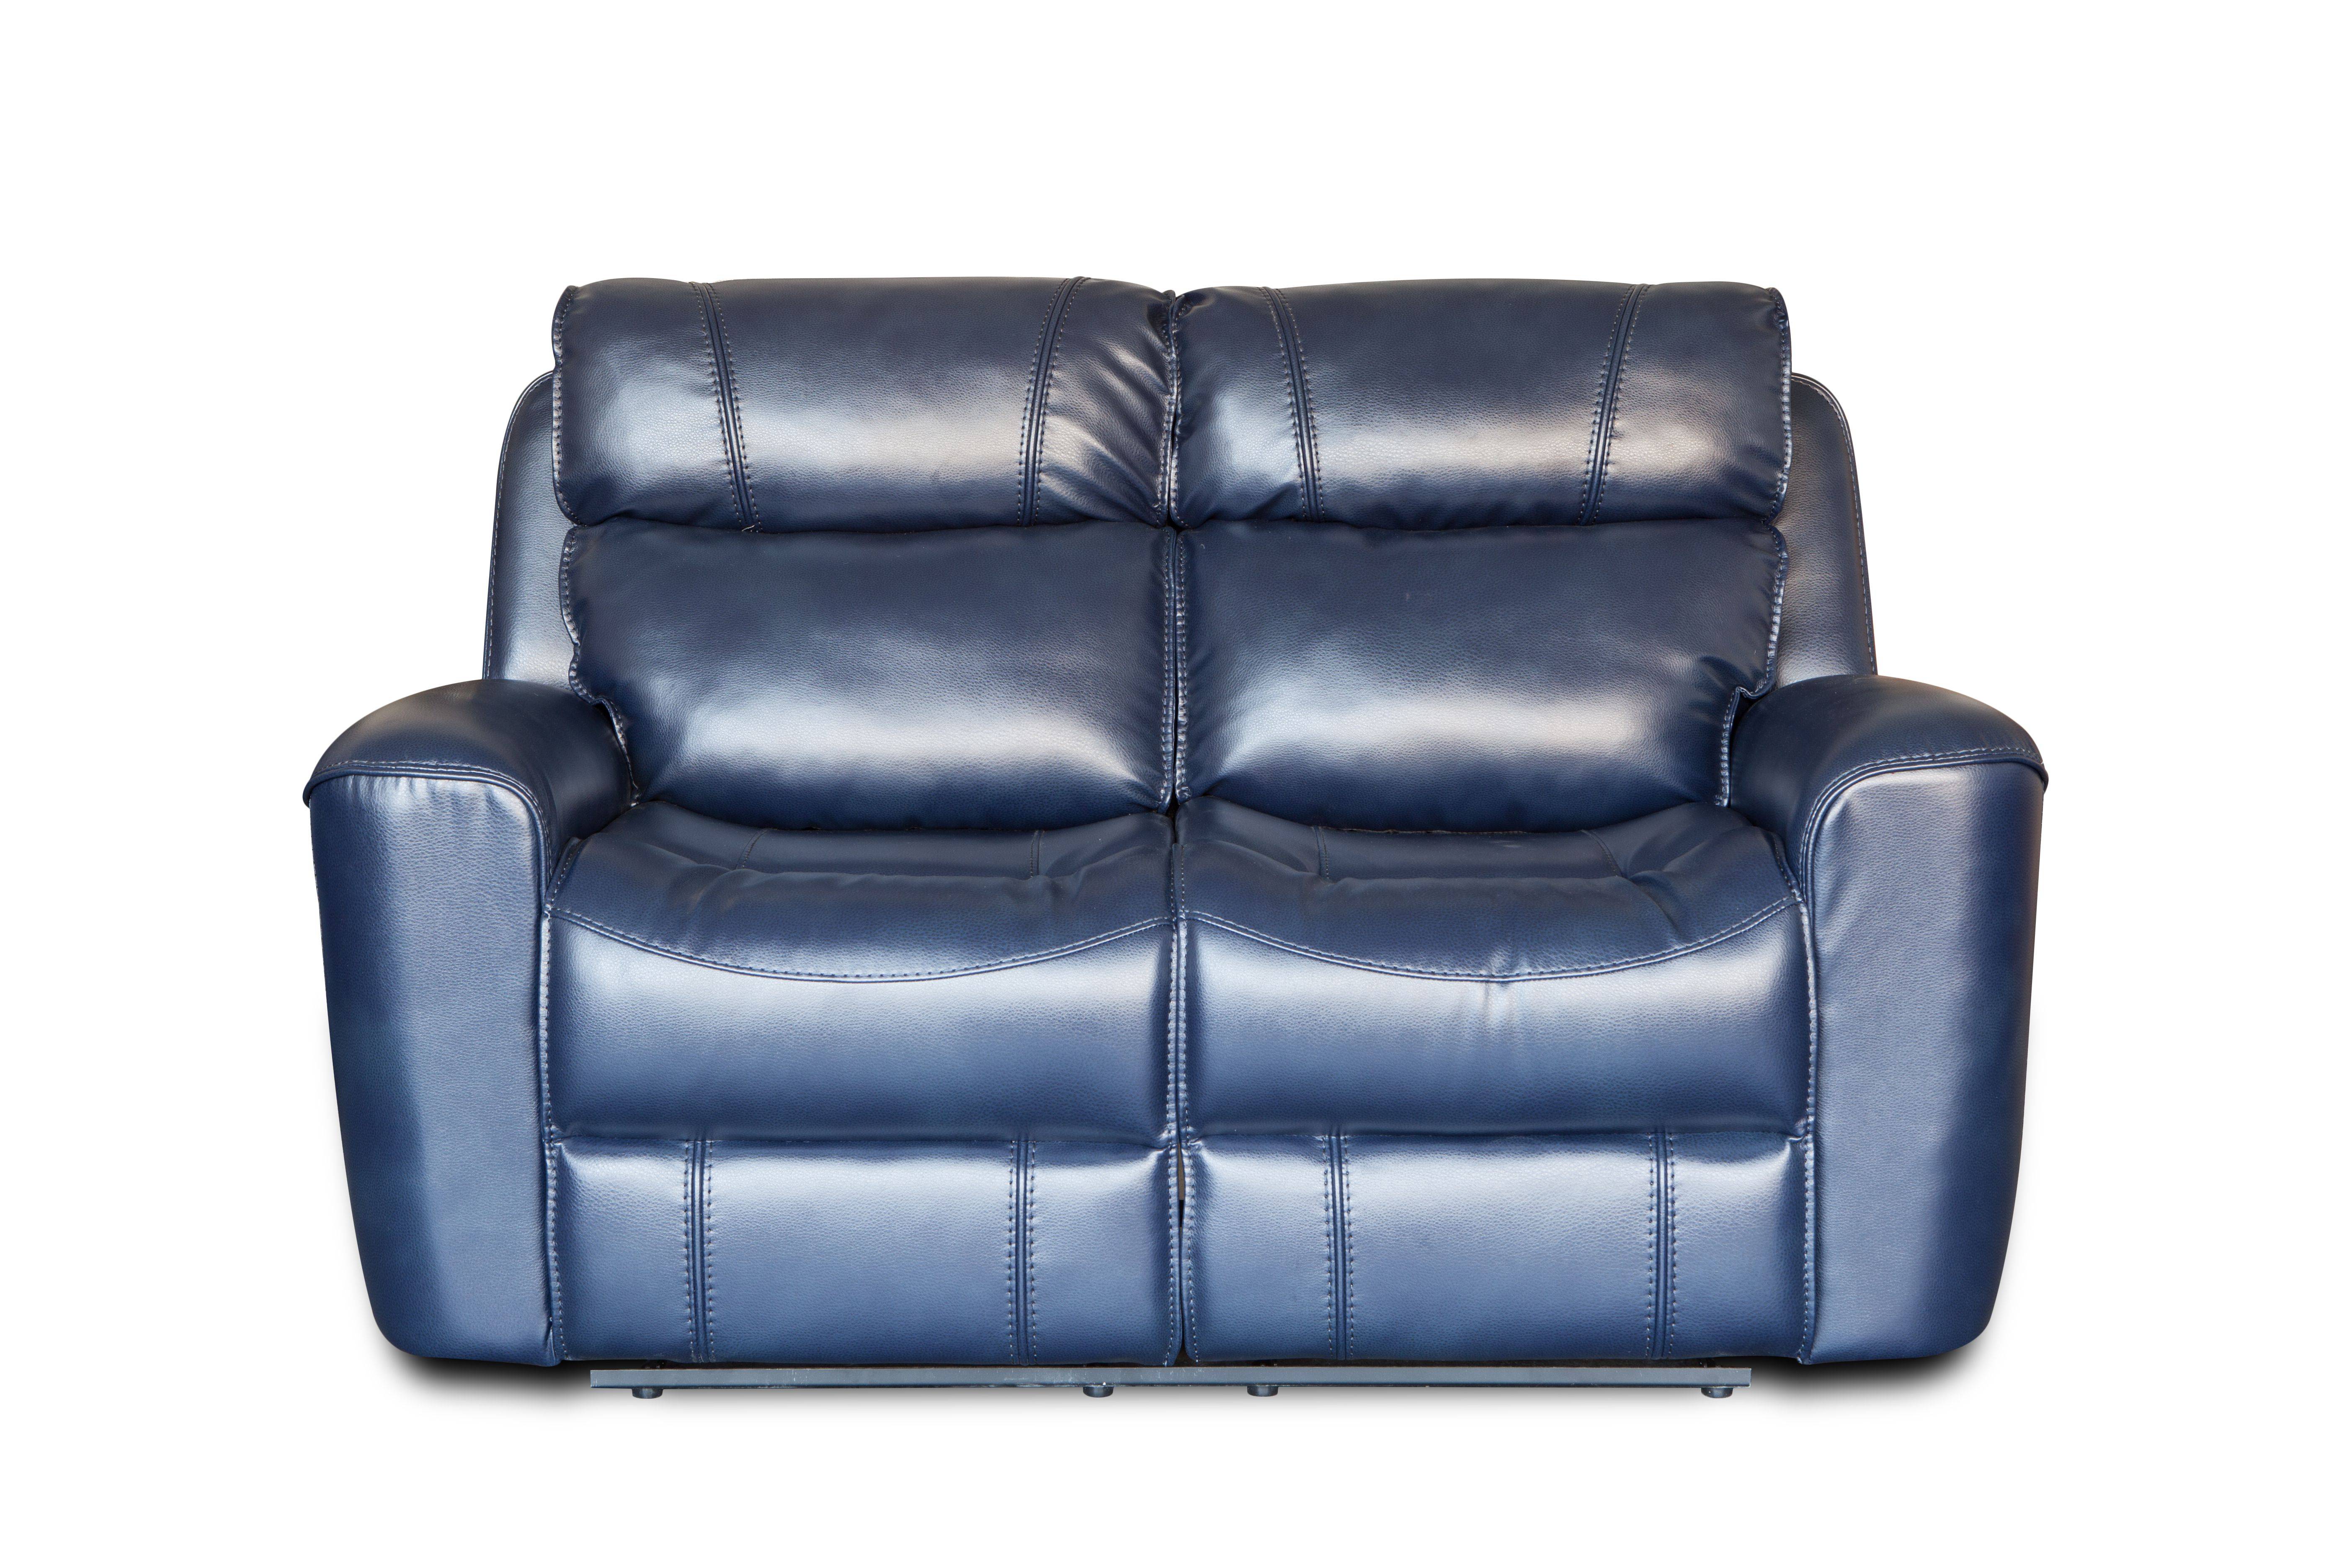 Modern furniture living room leather power american recliner sofa